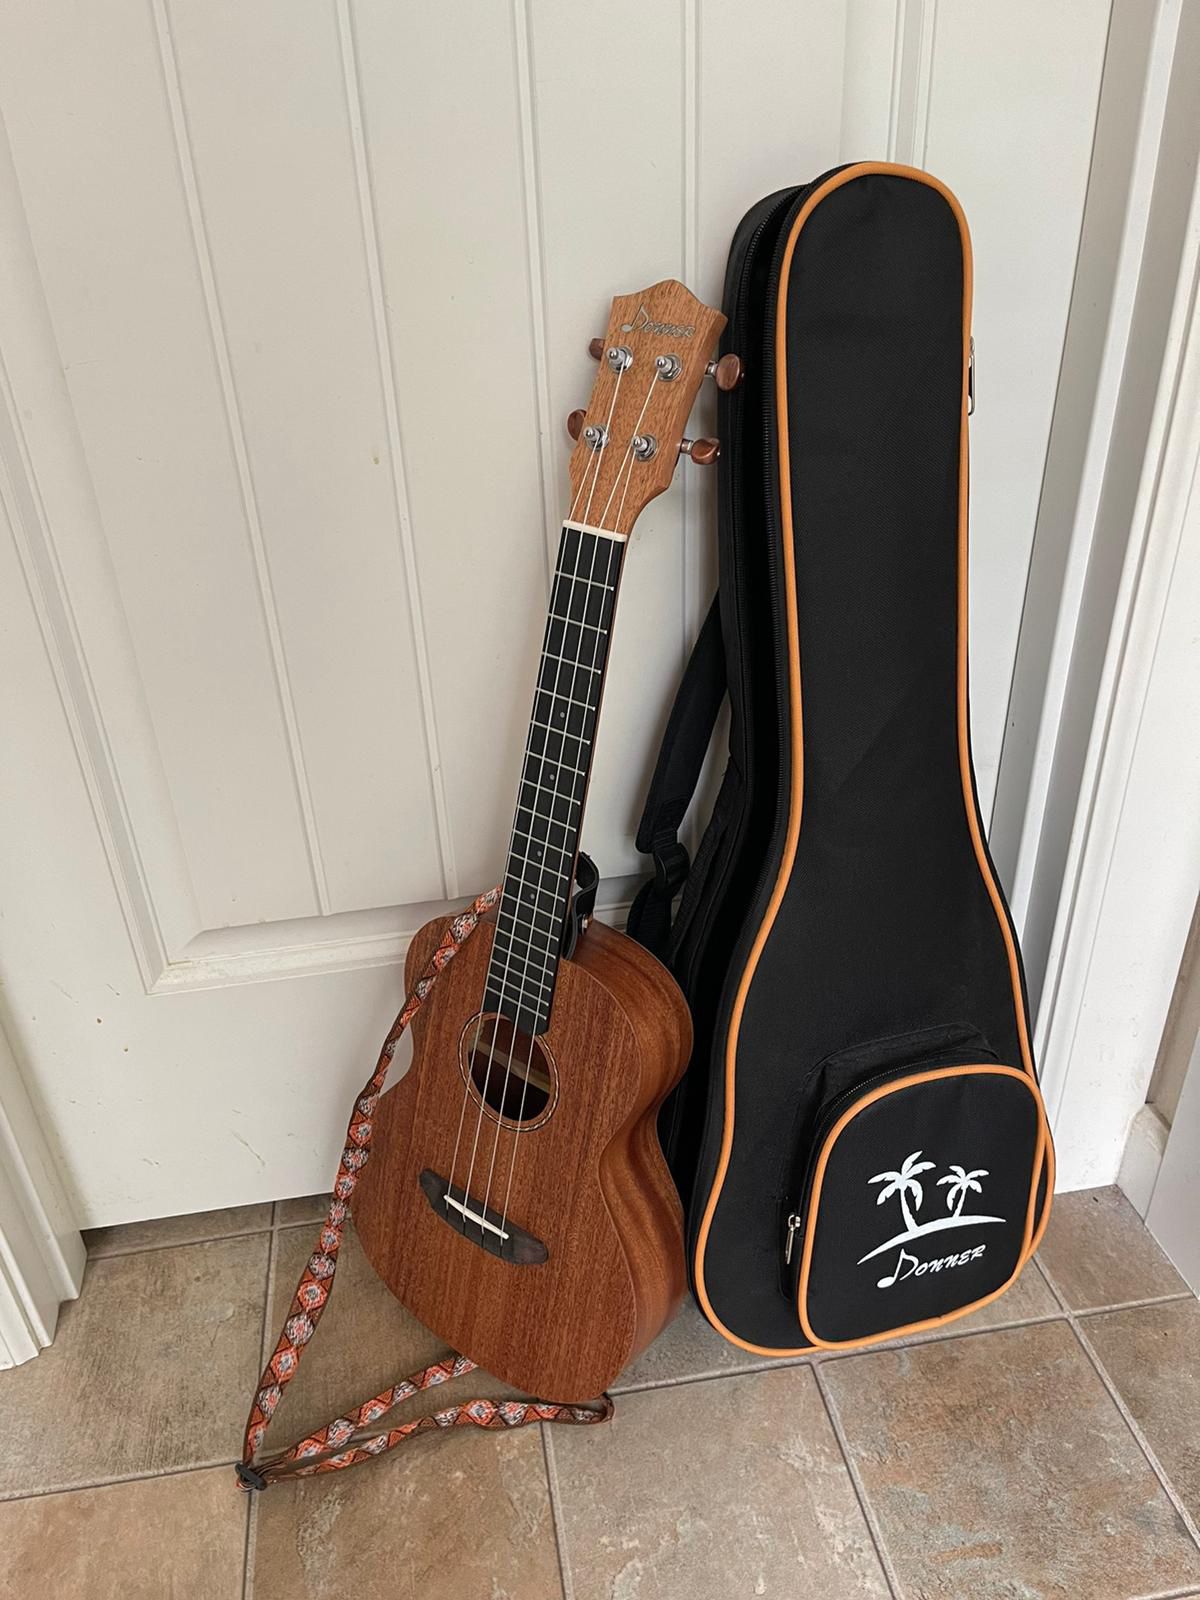 Donner Ukelele With Carry Bag 